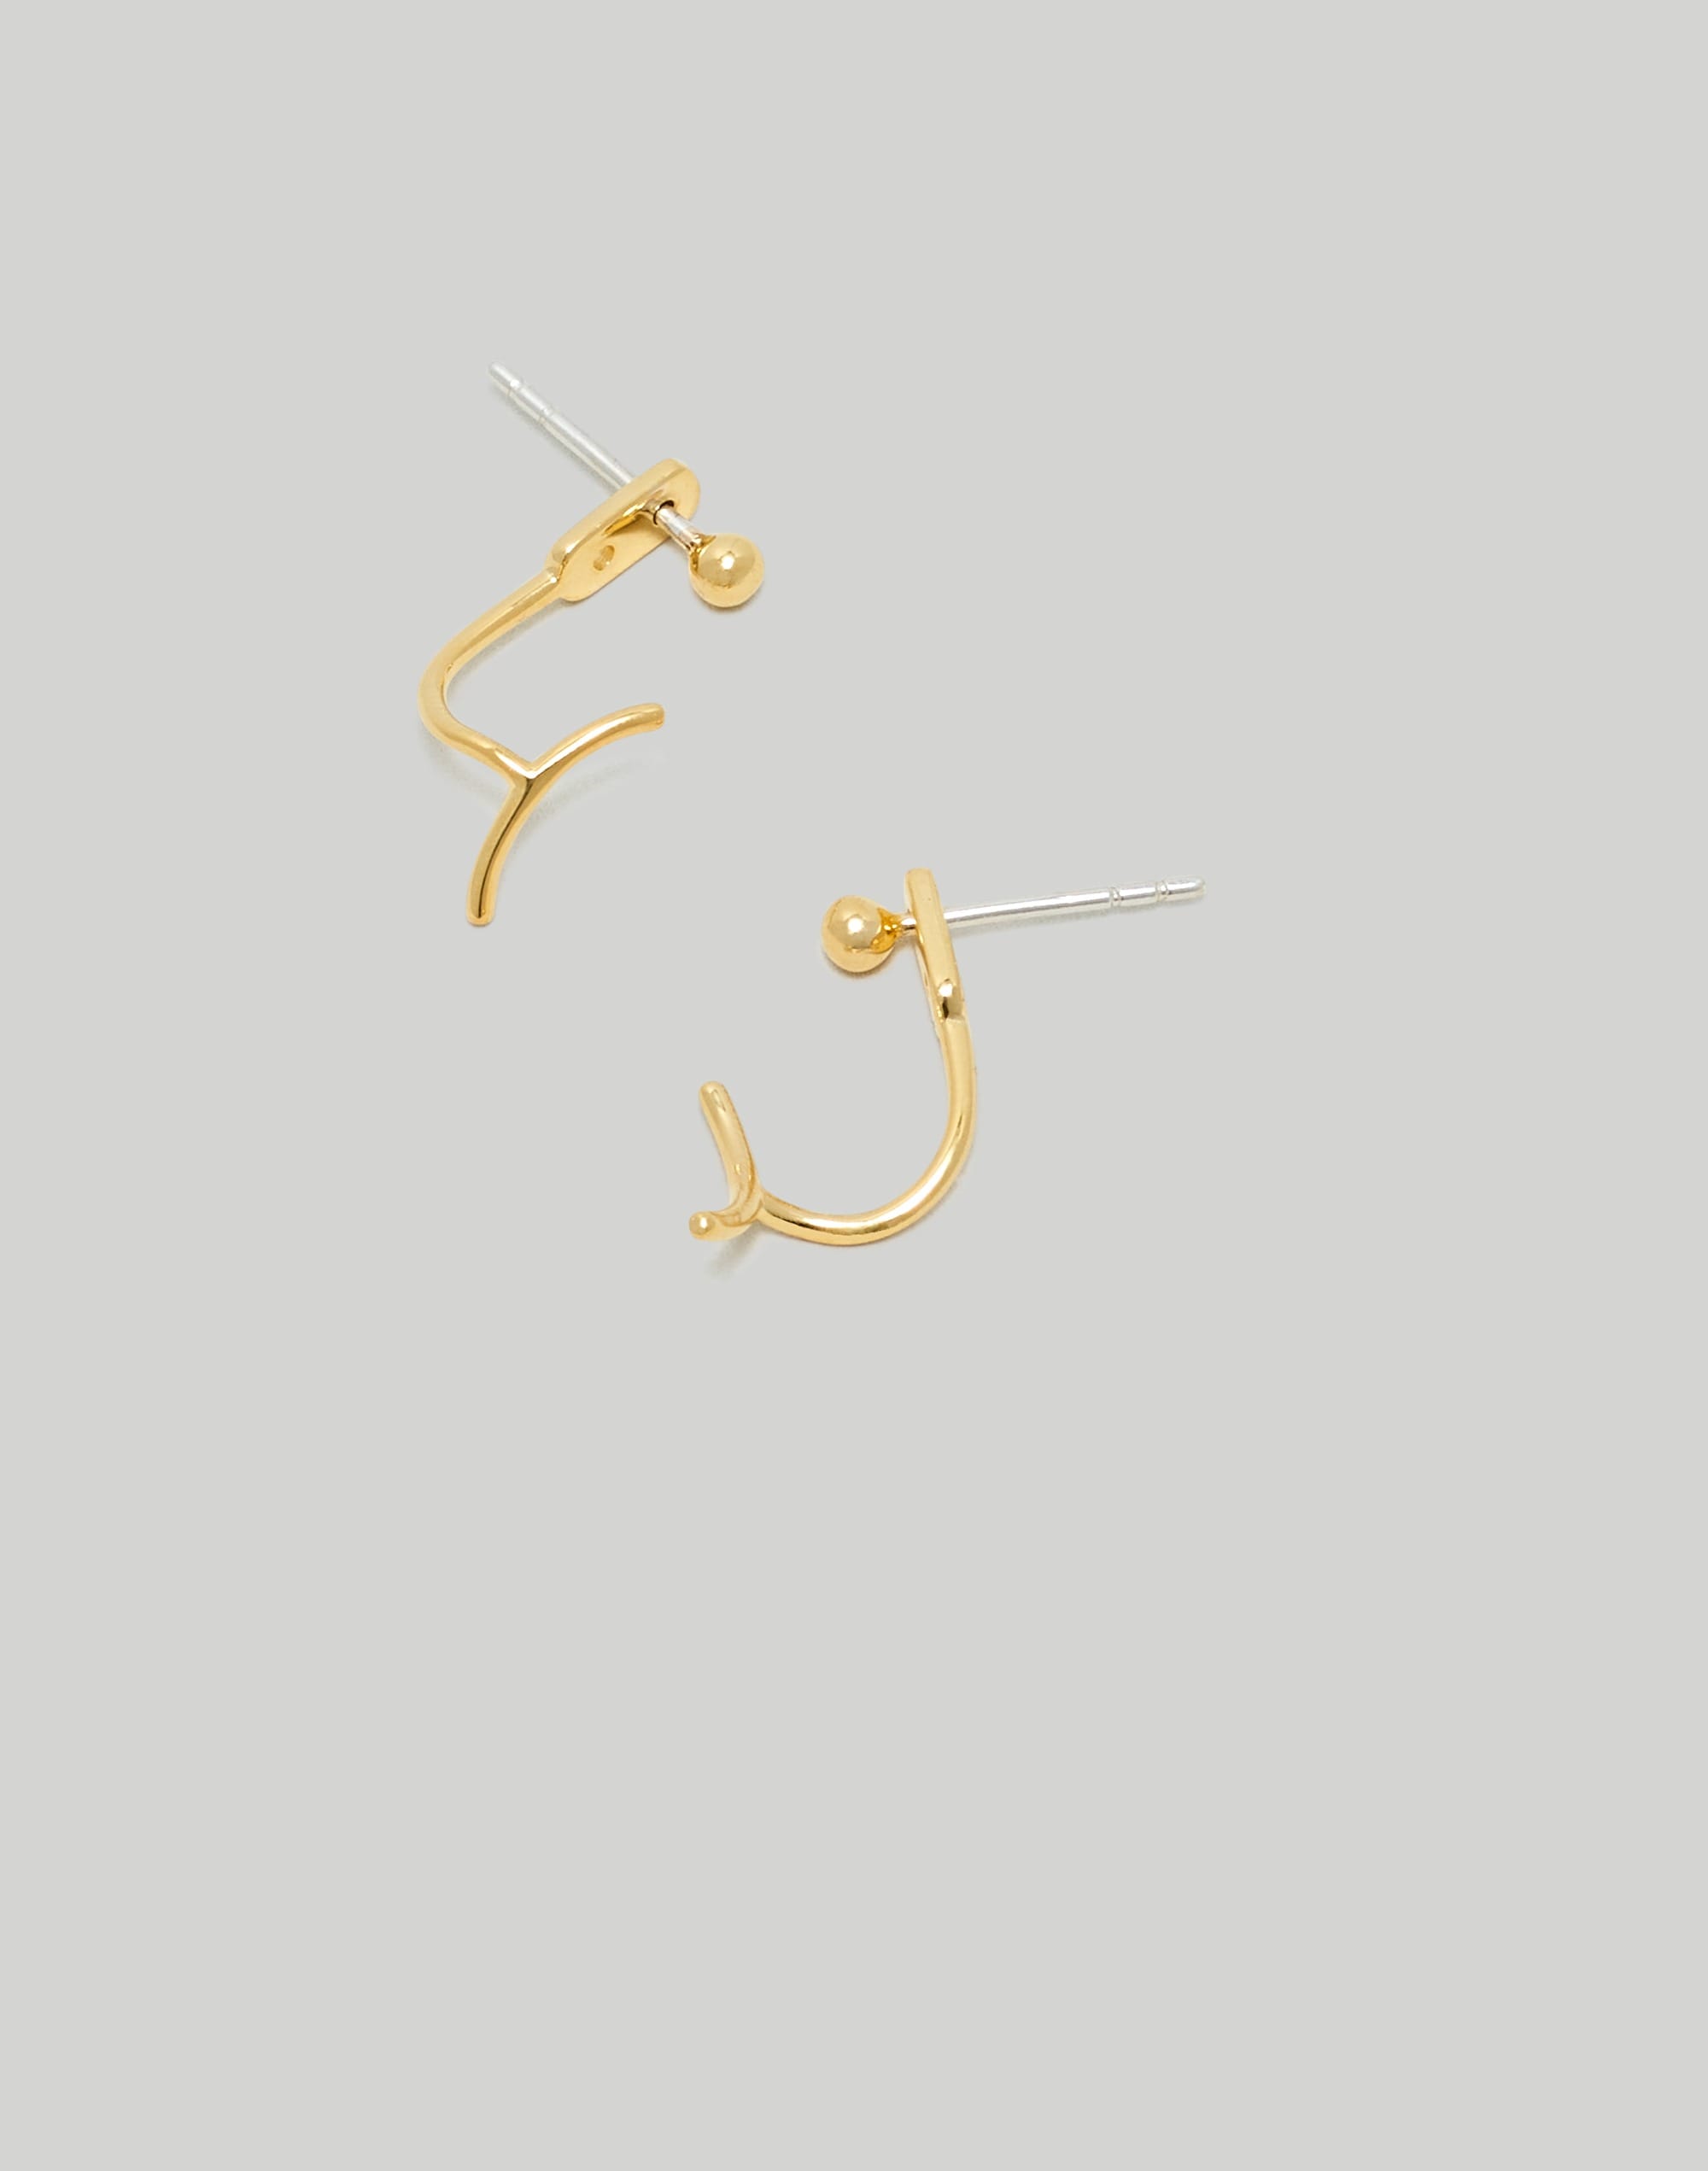 Mw Delicate Collection Demi-fine 14k Plated Curved Stud Earrings In 14k Gold